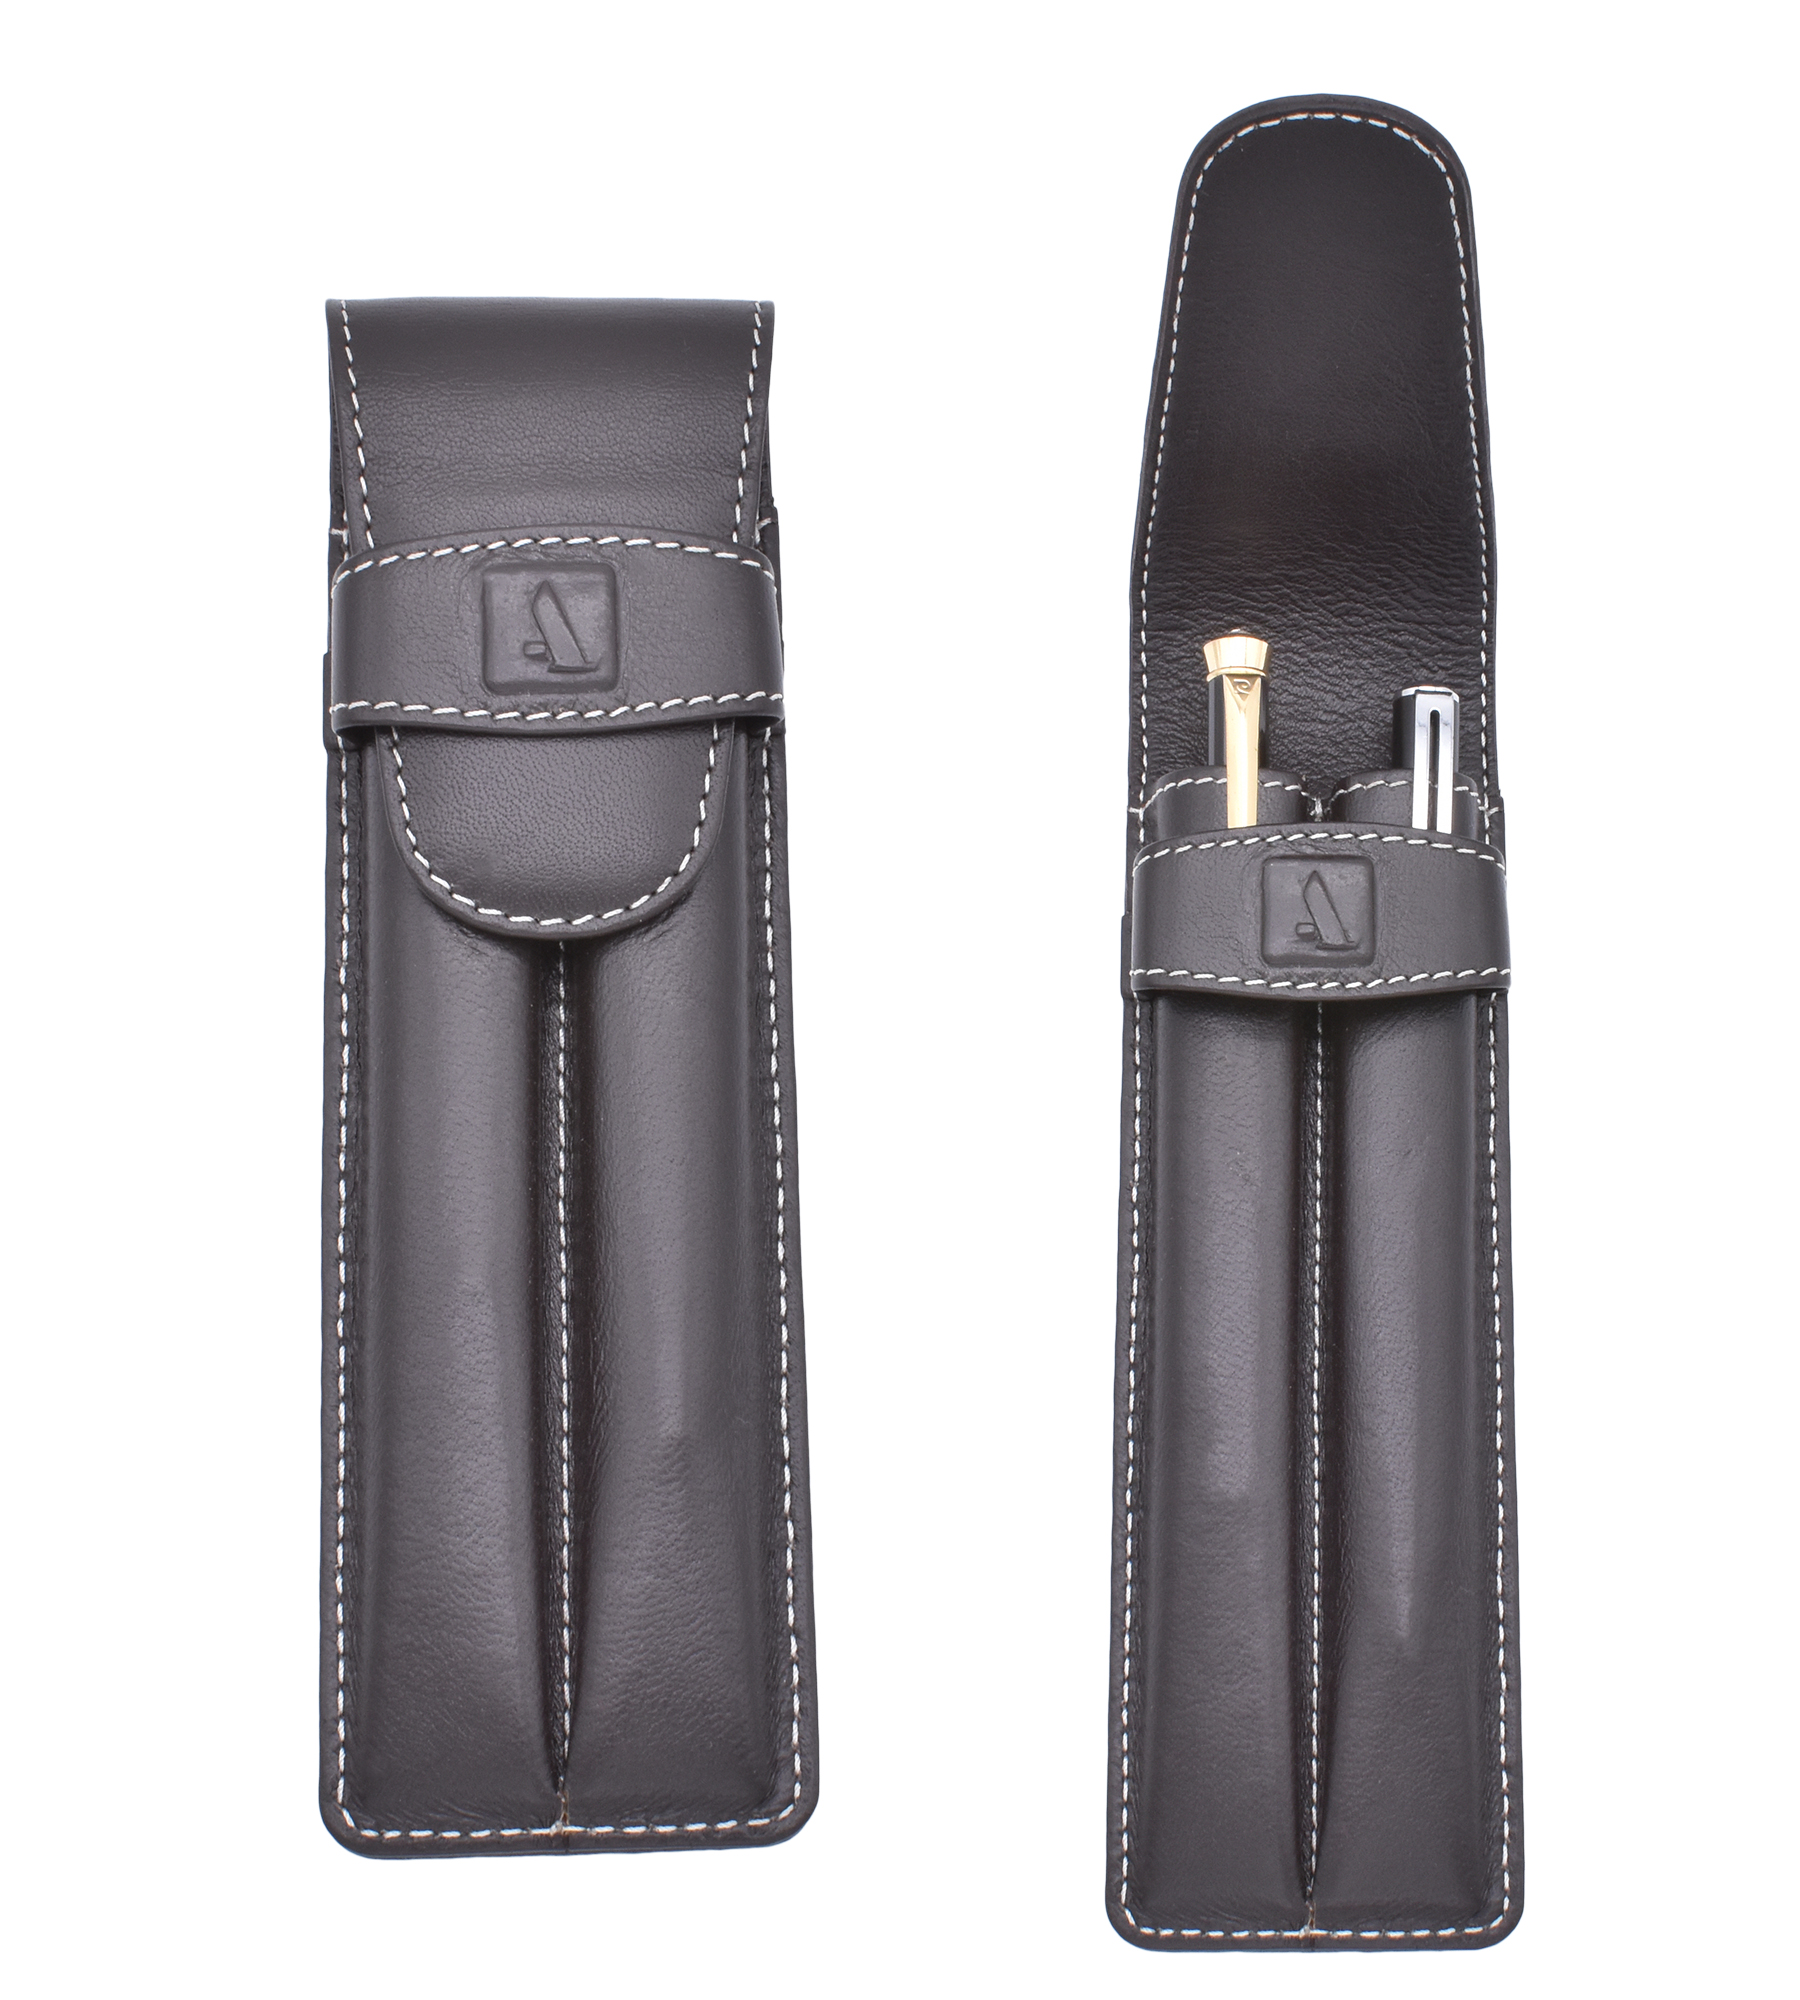 Pen Case--Pen case to carry 2 pens in Genuine Leather - Brown